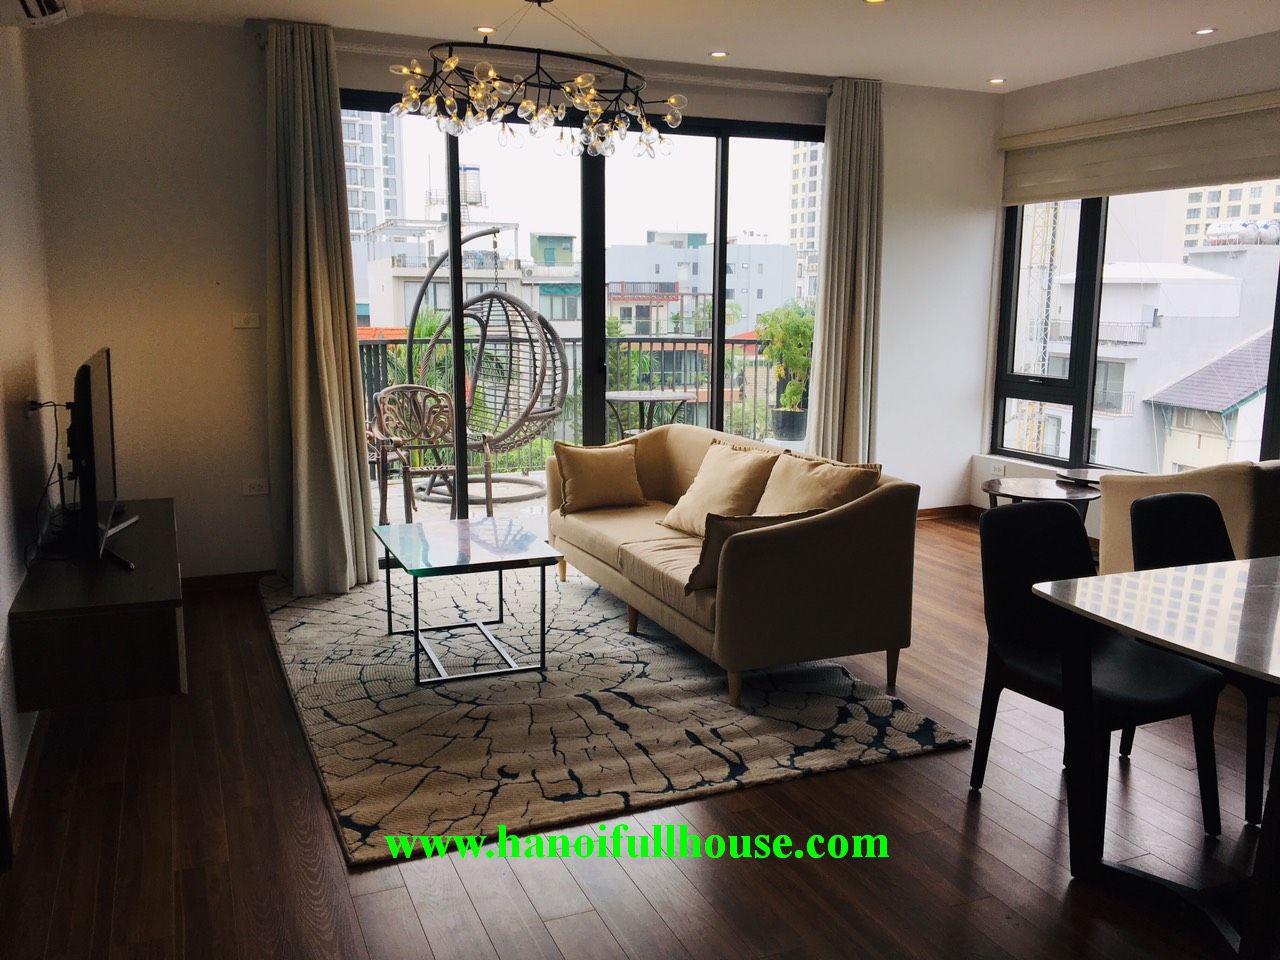 Wonderful apartment with nice balcony in Tay Ho - 2 bedrooms, nice view. 